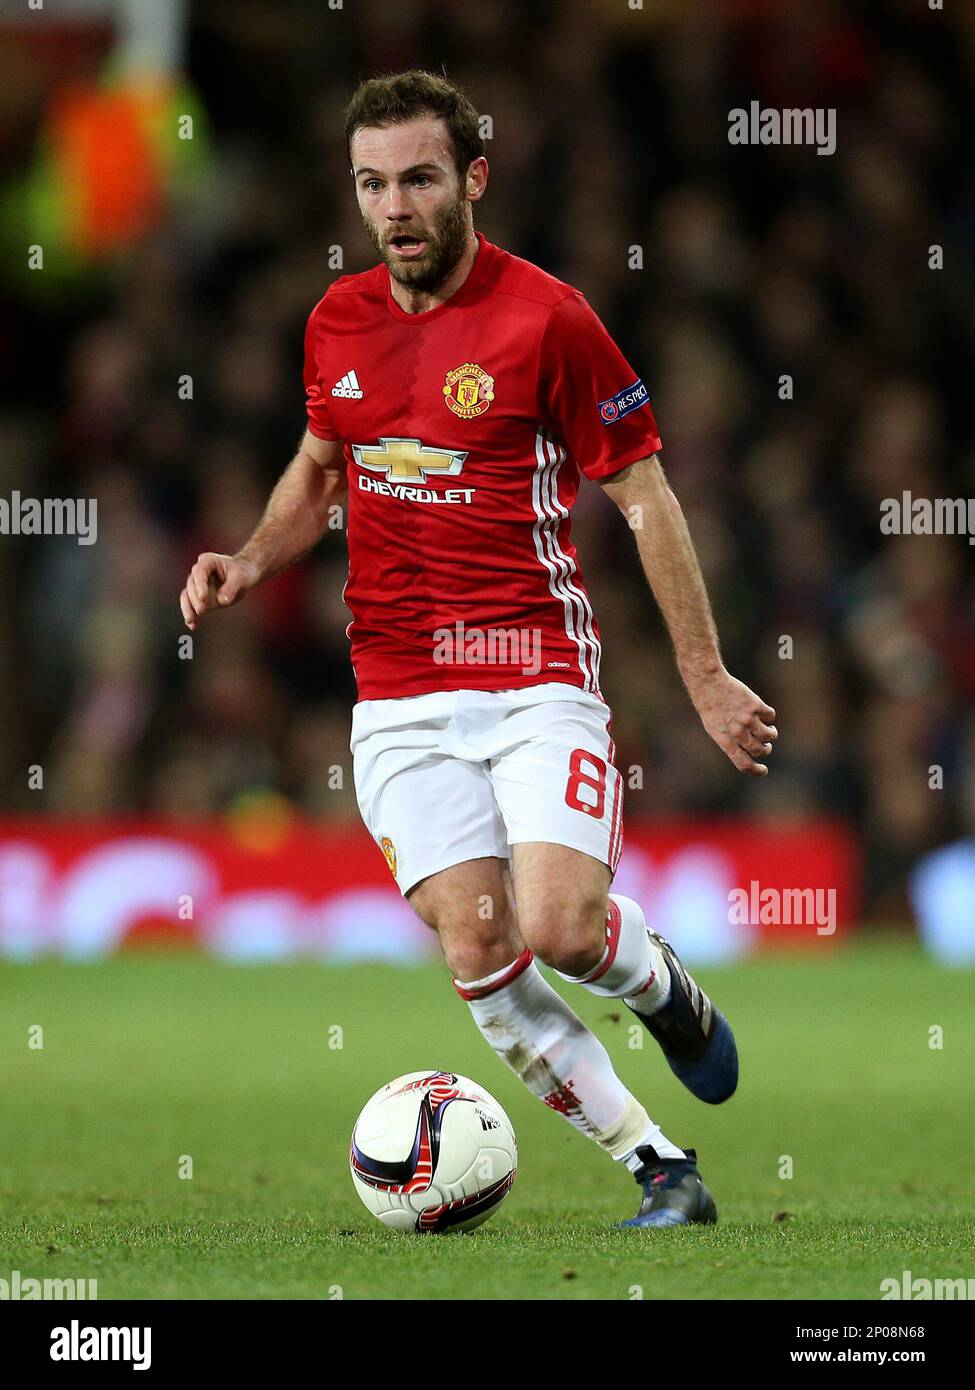 February 16, 2017 - Manchester, United Kingdom - Juan Mata of Manchester  United during the UEFA Europa League Round of 32 1st leg match at Old  Trafford Stadium, Manchester. Picture date: February